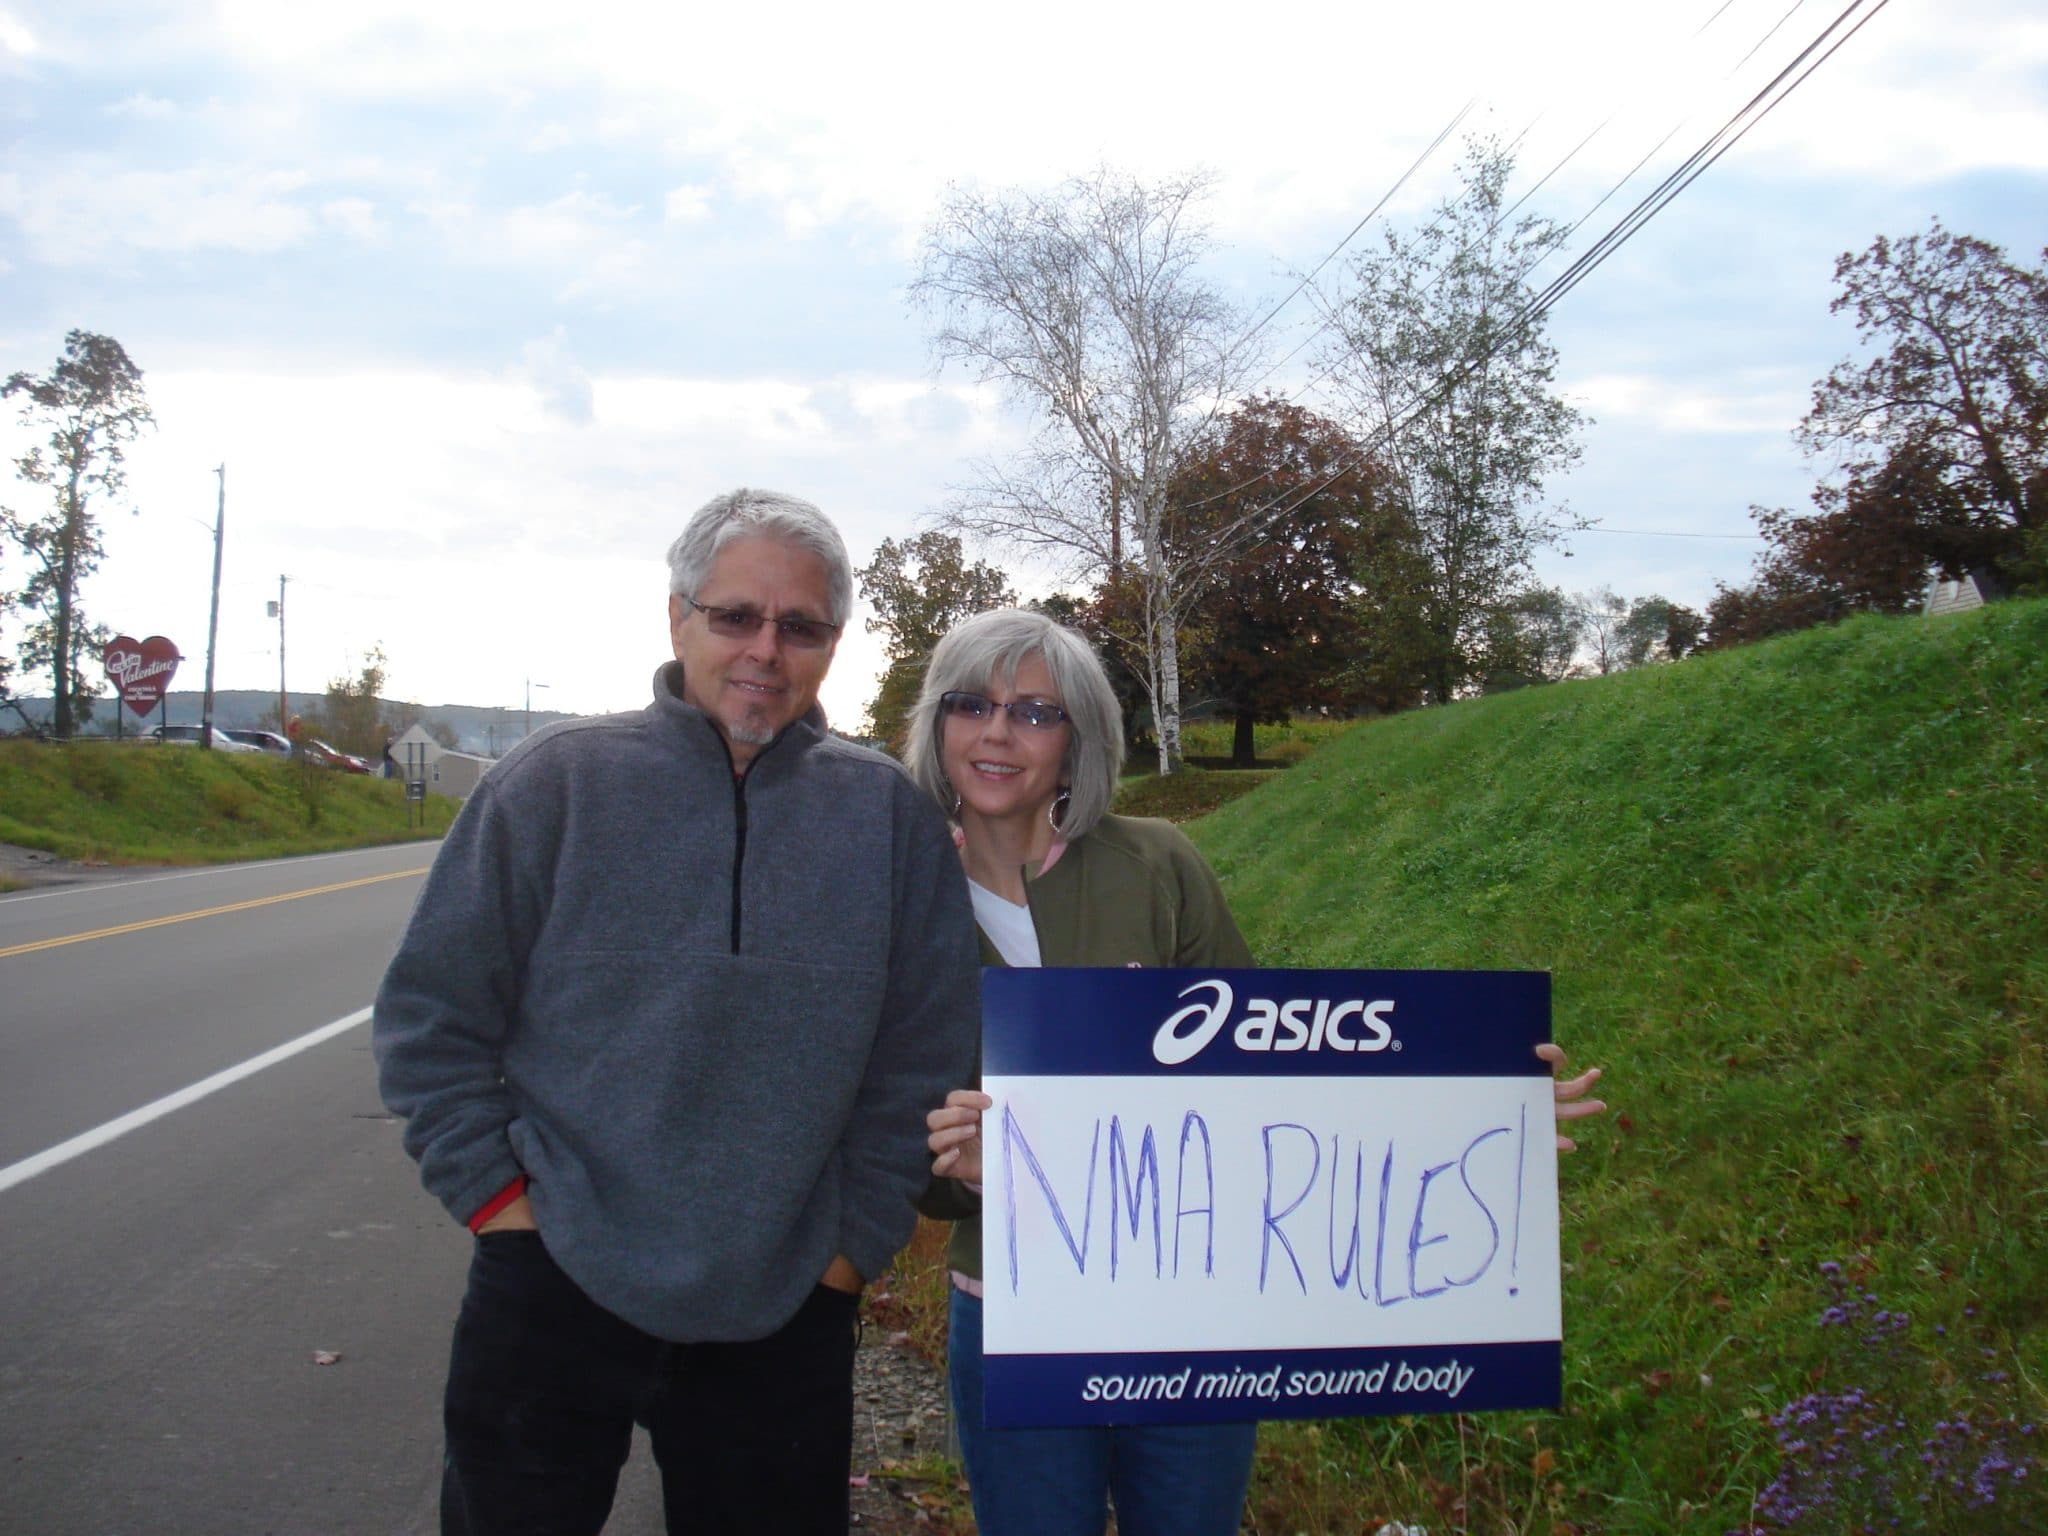 Matt's parents with "NMA Rules" sign cheering runners